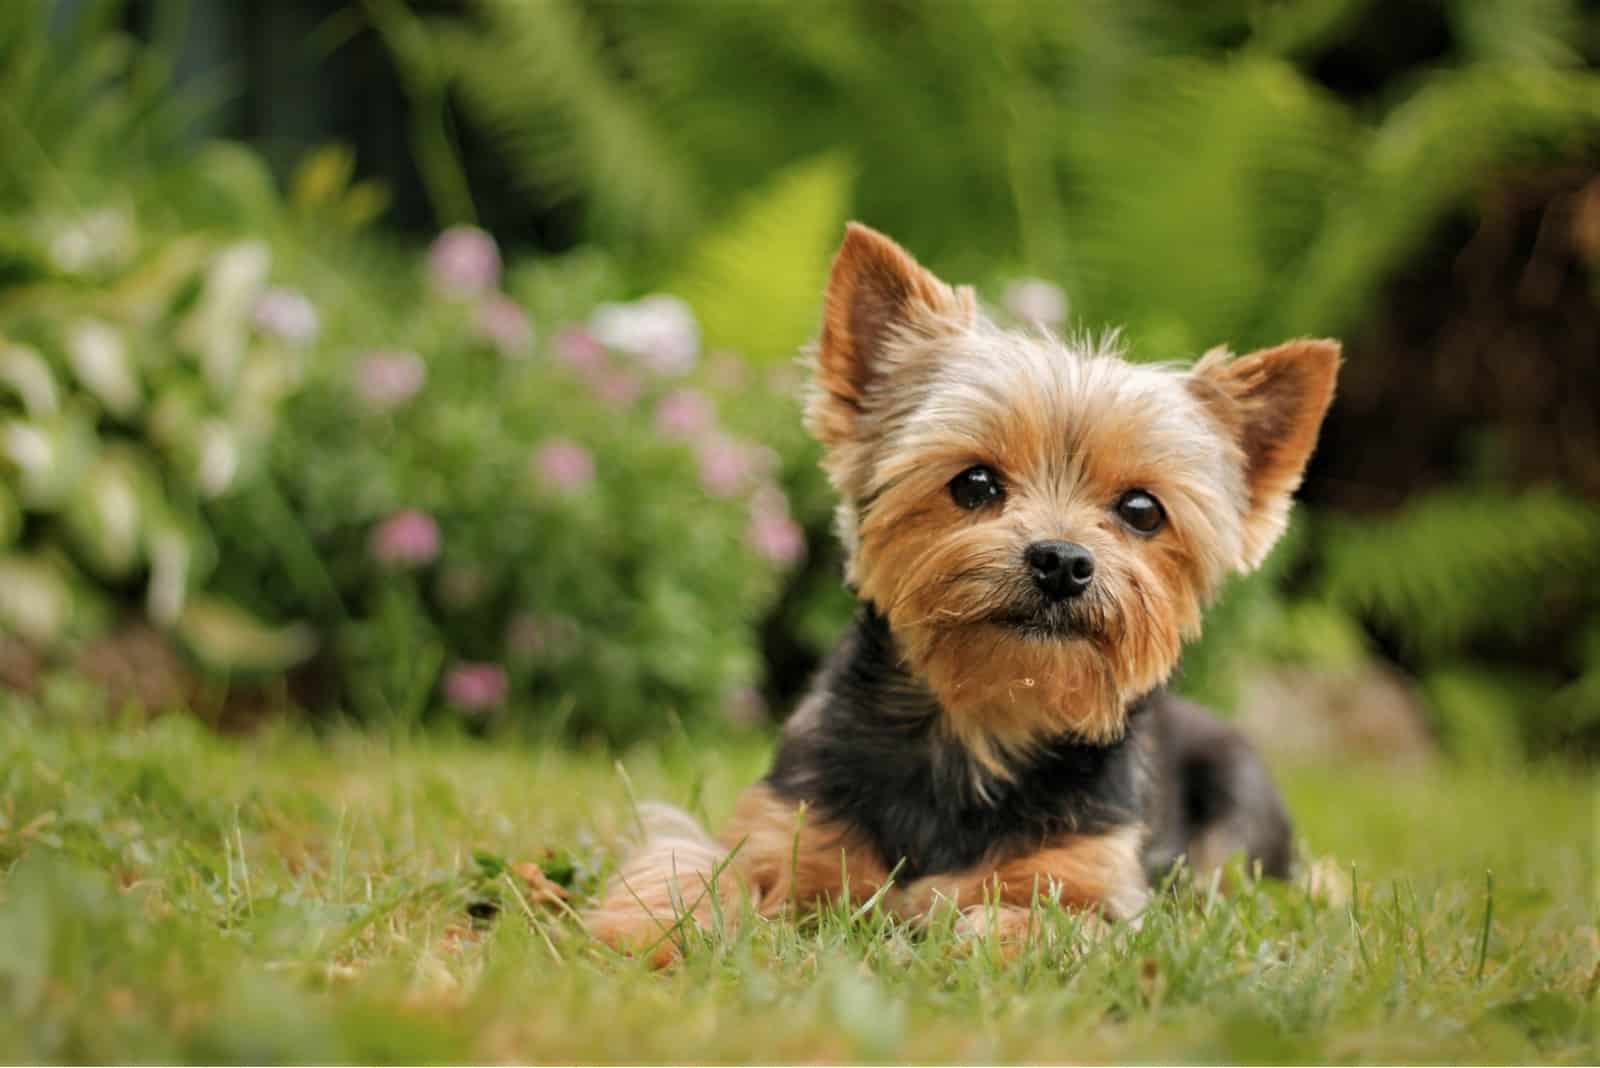 Yorkie dog laying in grass